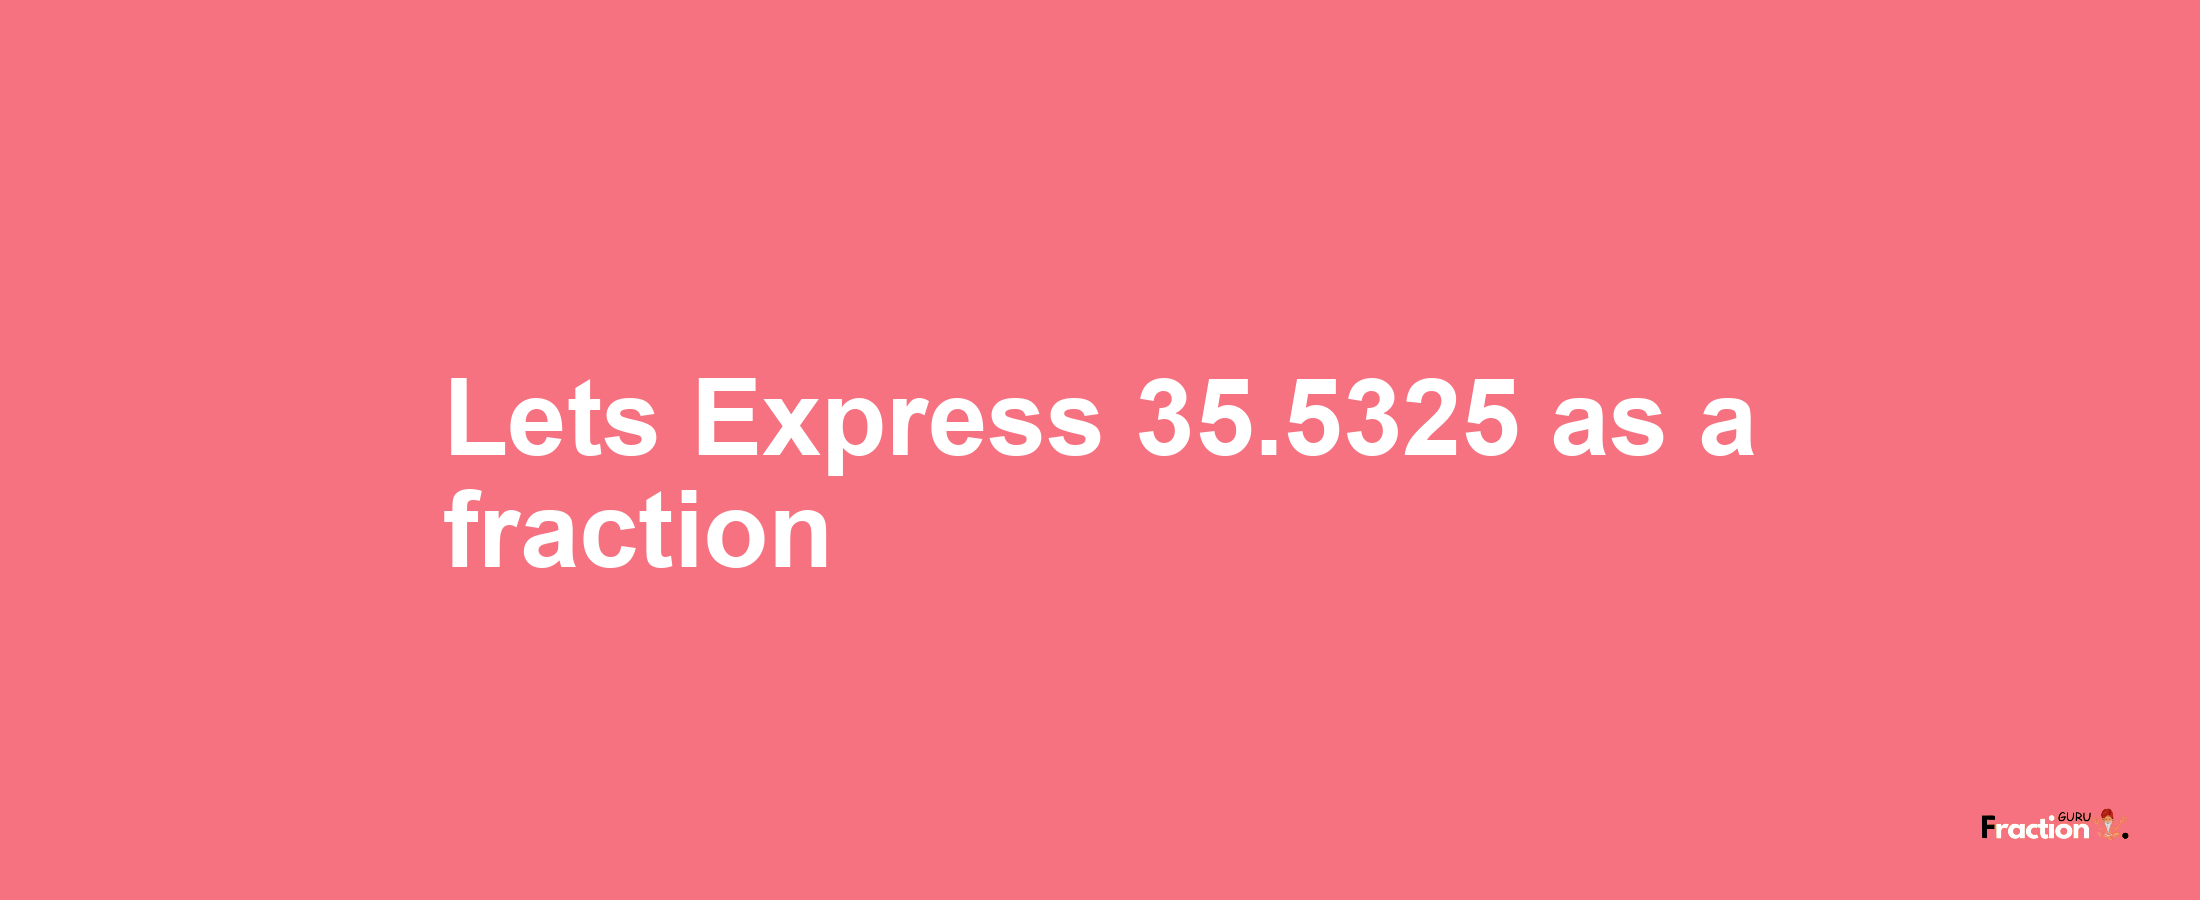 Lets Express 35.5325 as afraction